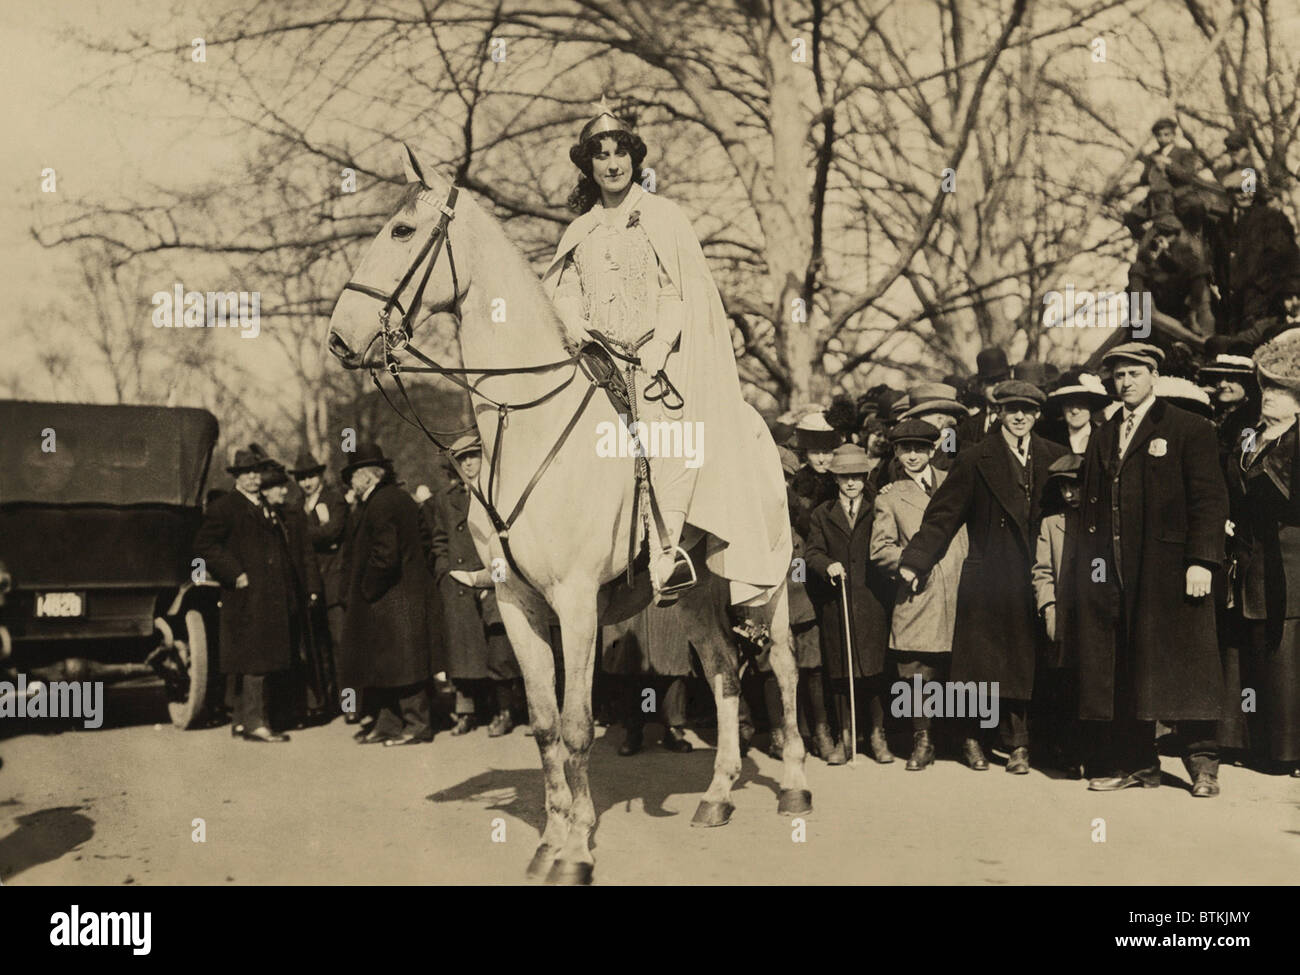 Inez Milholland, wearing white robes and a crown riding a white horse as the 'Herald' in the Women's Suffrage parade of March 3, 1913, the day prior to Woodrow Wilson's inauguration. It was the last major suffrage demonstration to use such theatrical costumes. Stock Photo